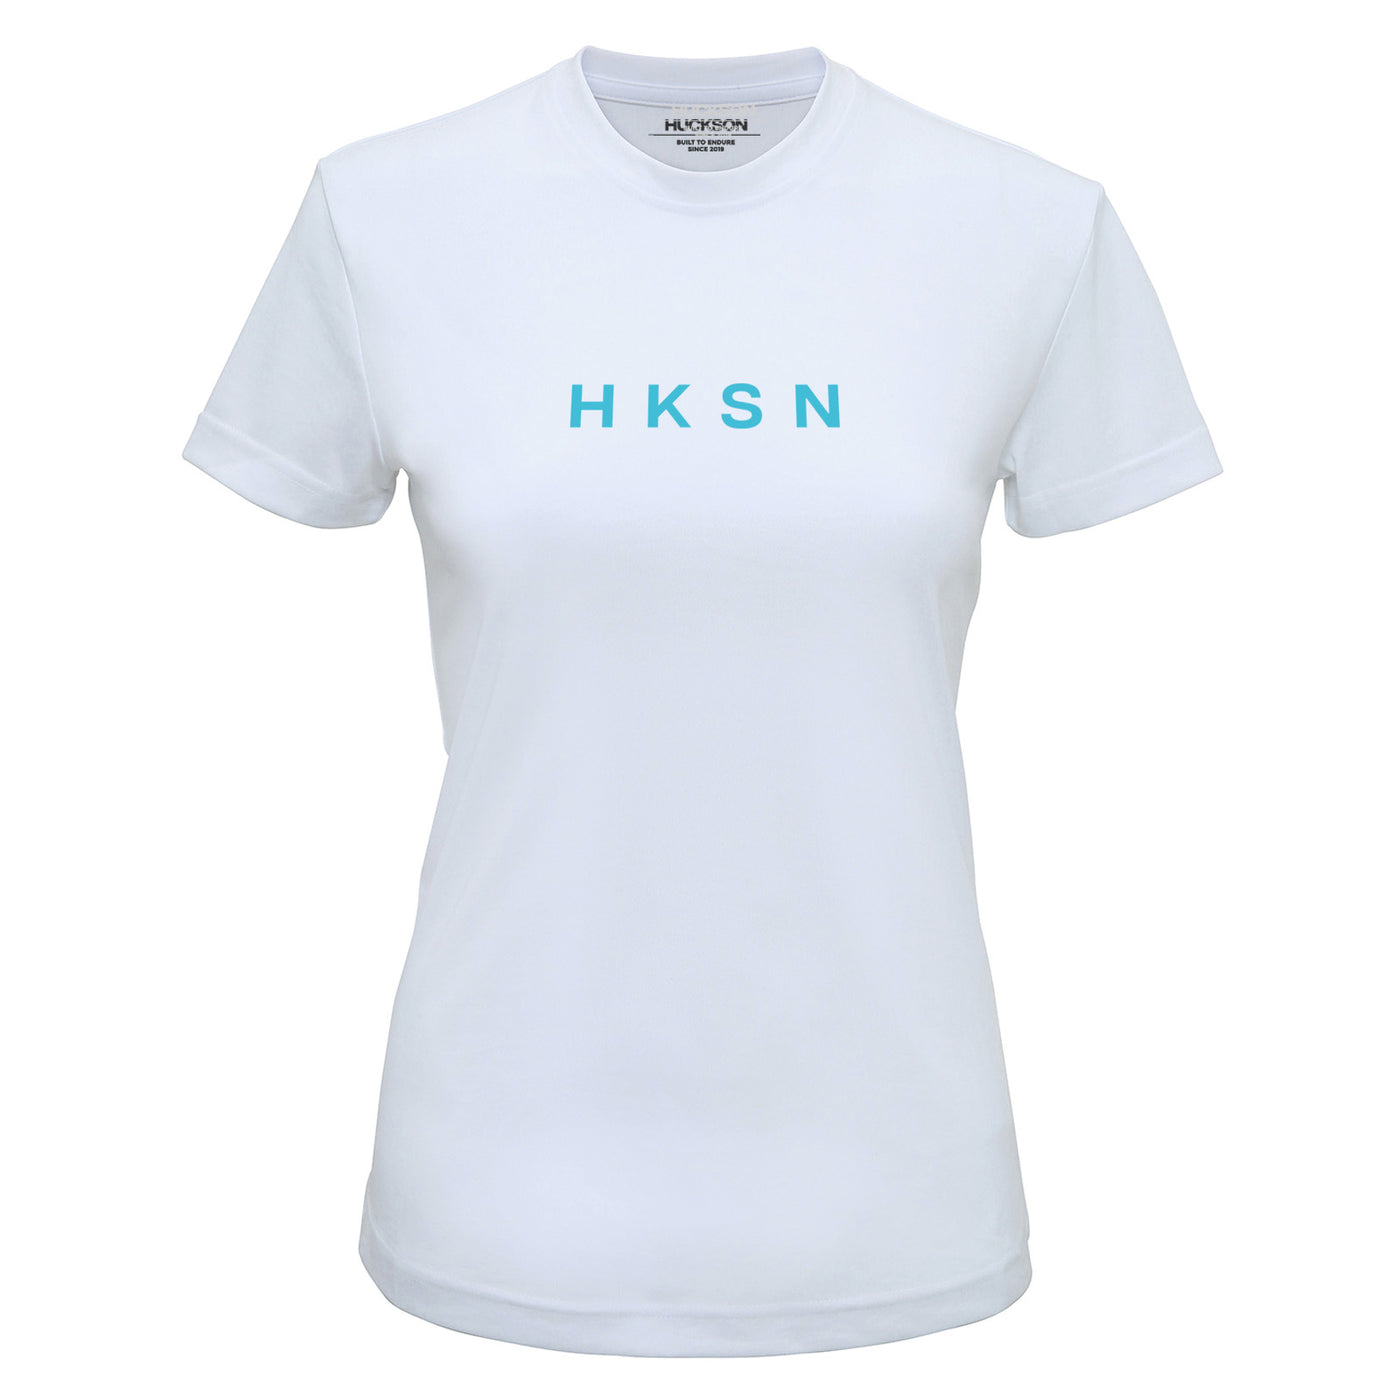 'Energise' White and Teal Training T-Shirt